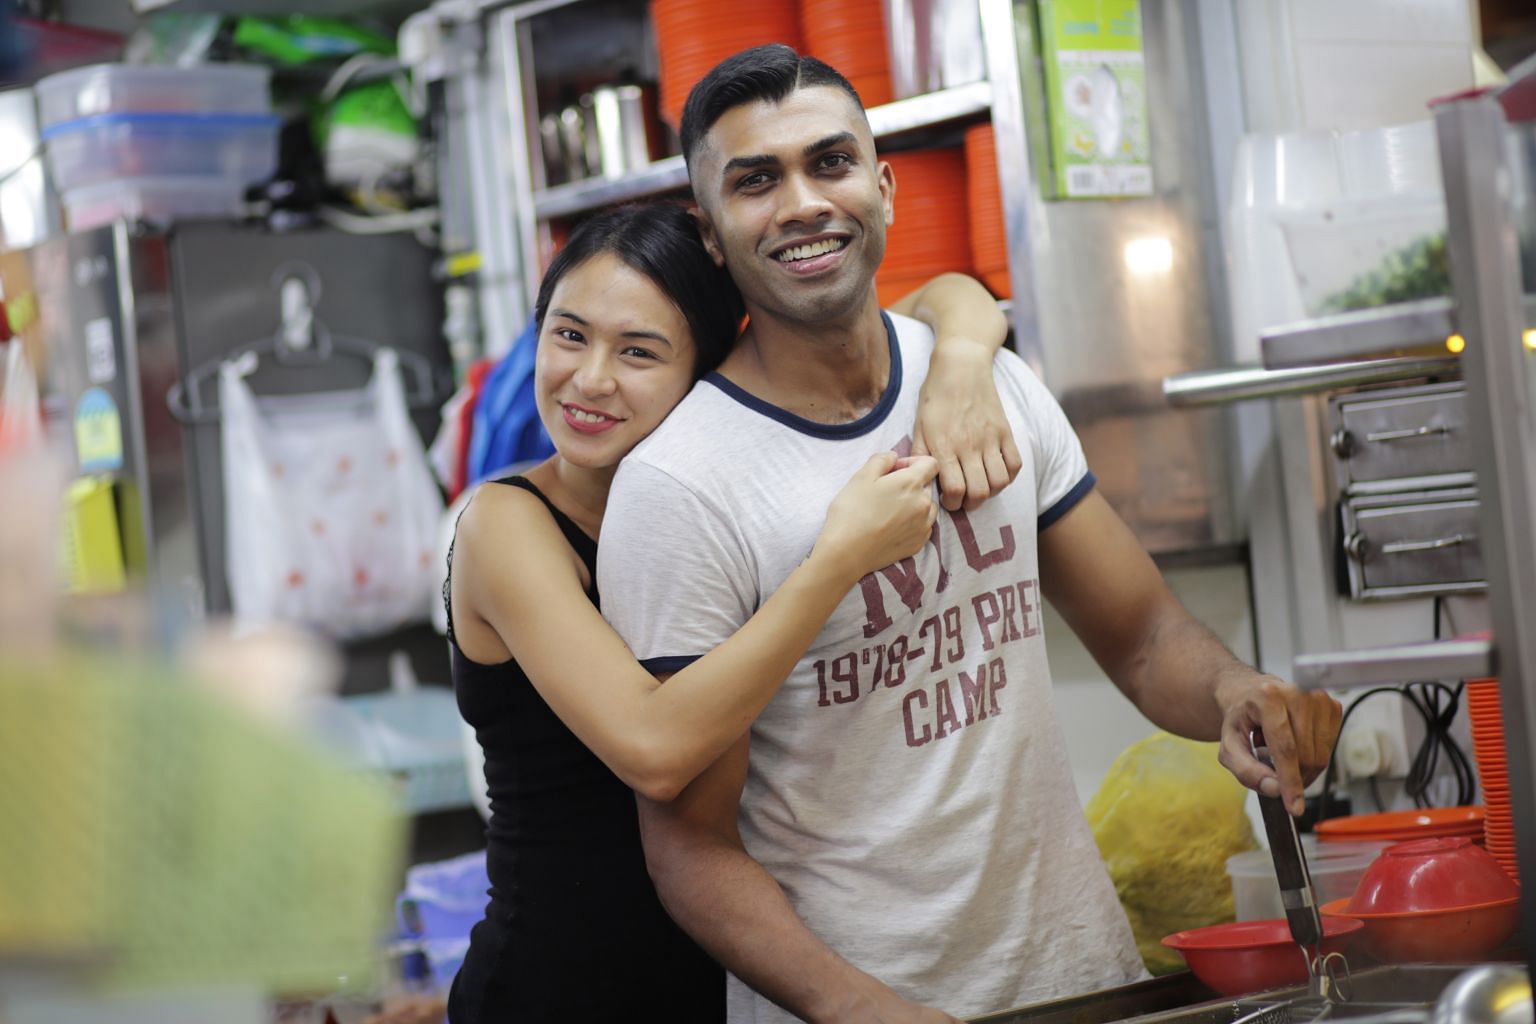 When Ms May Leena Krishnan posted a video of her fiance Jeevan Ananthan cooking fishball noodles, she did not expect his looks to draw so much attention